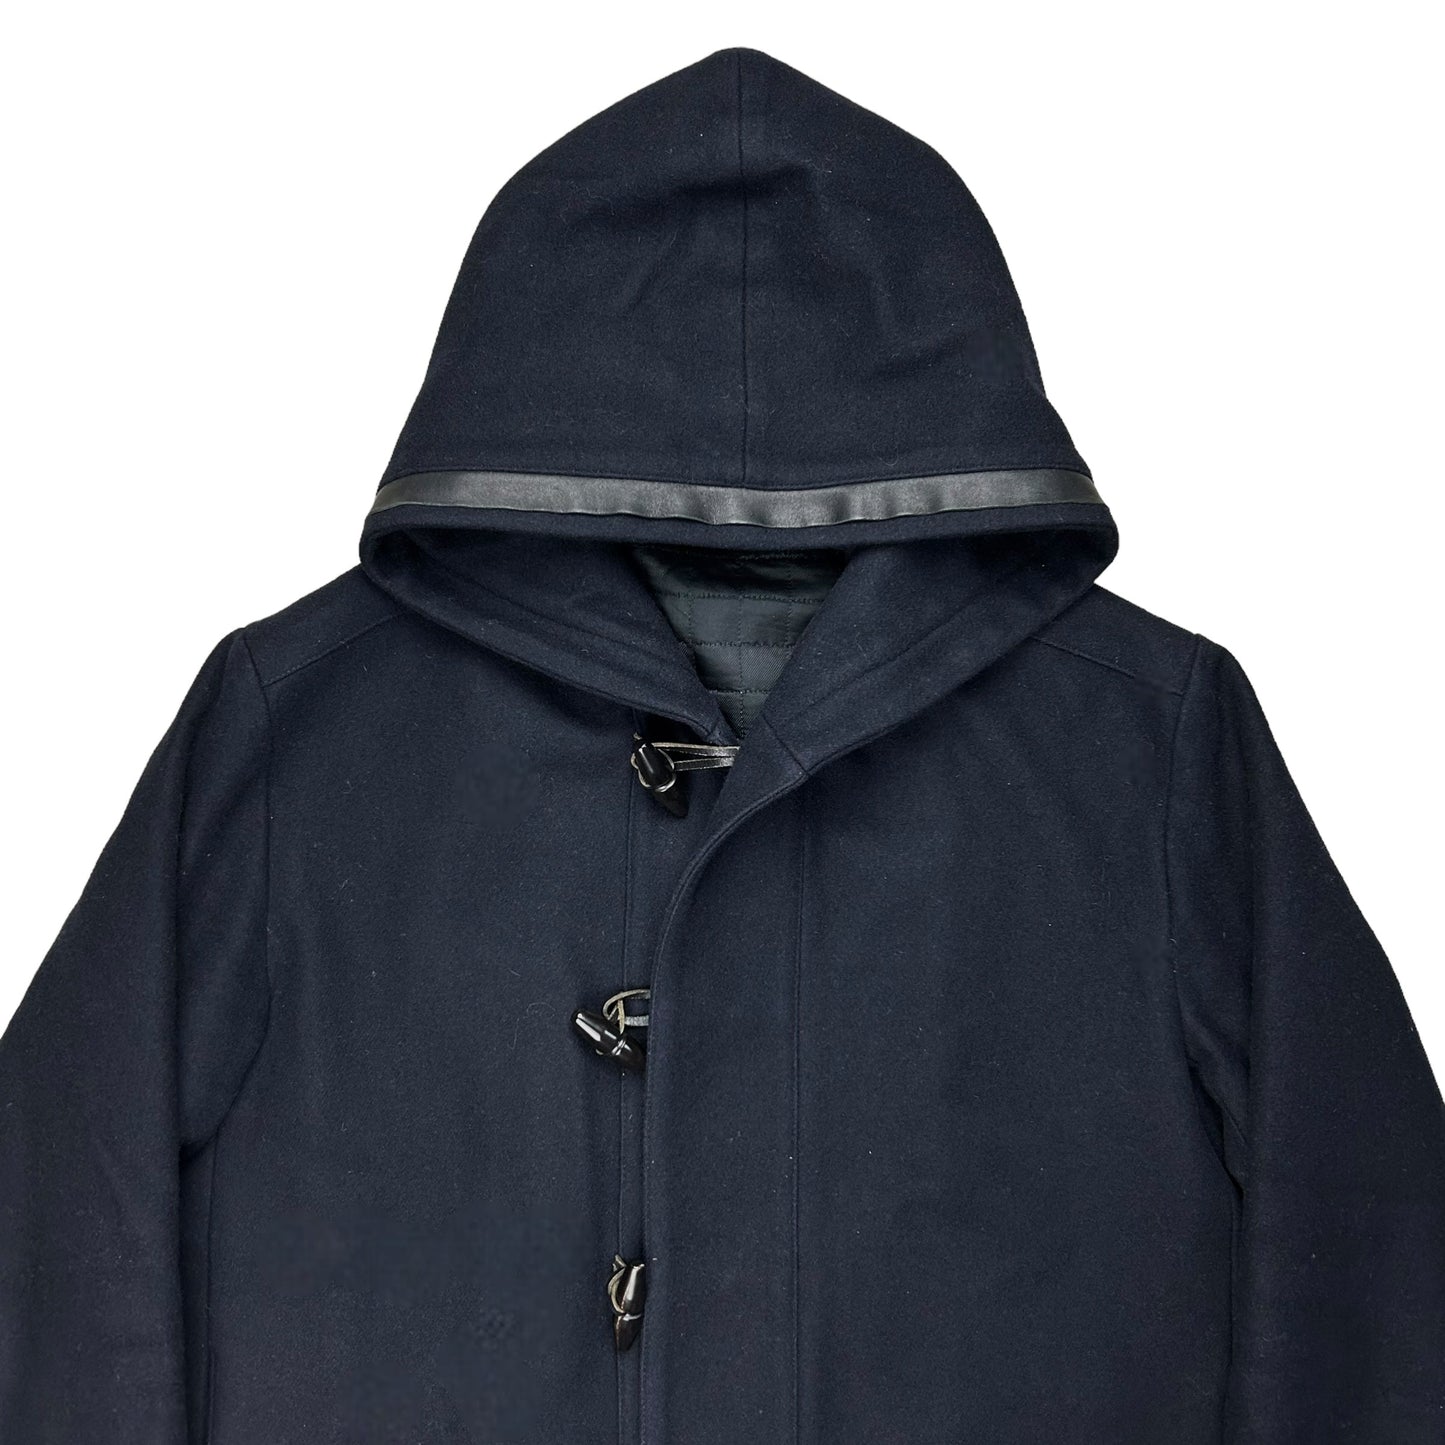 Dior Homme Leather Trimmed Hooded Duffle Jacket - AW11